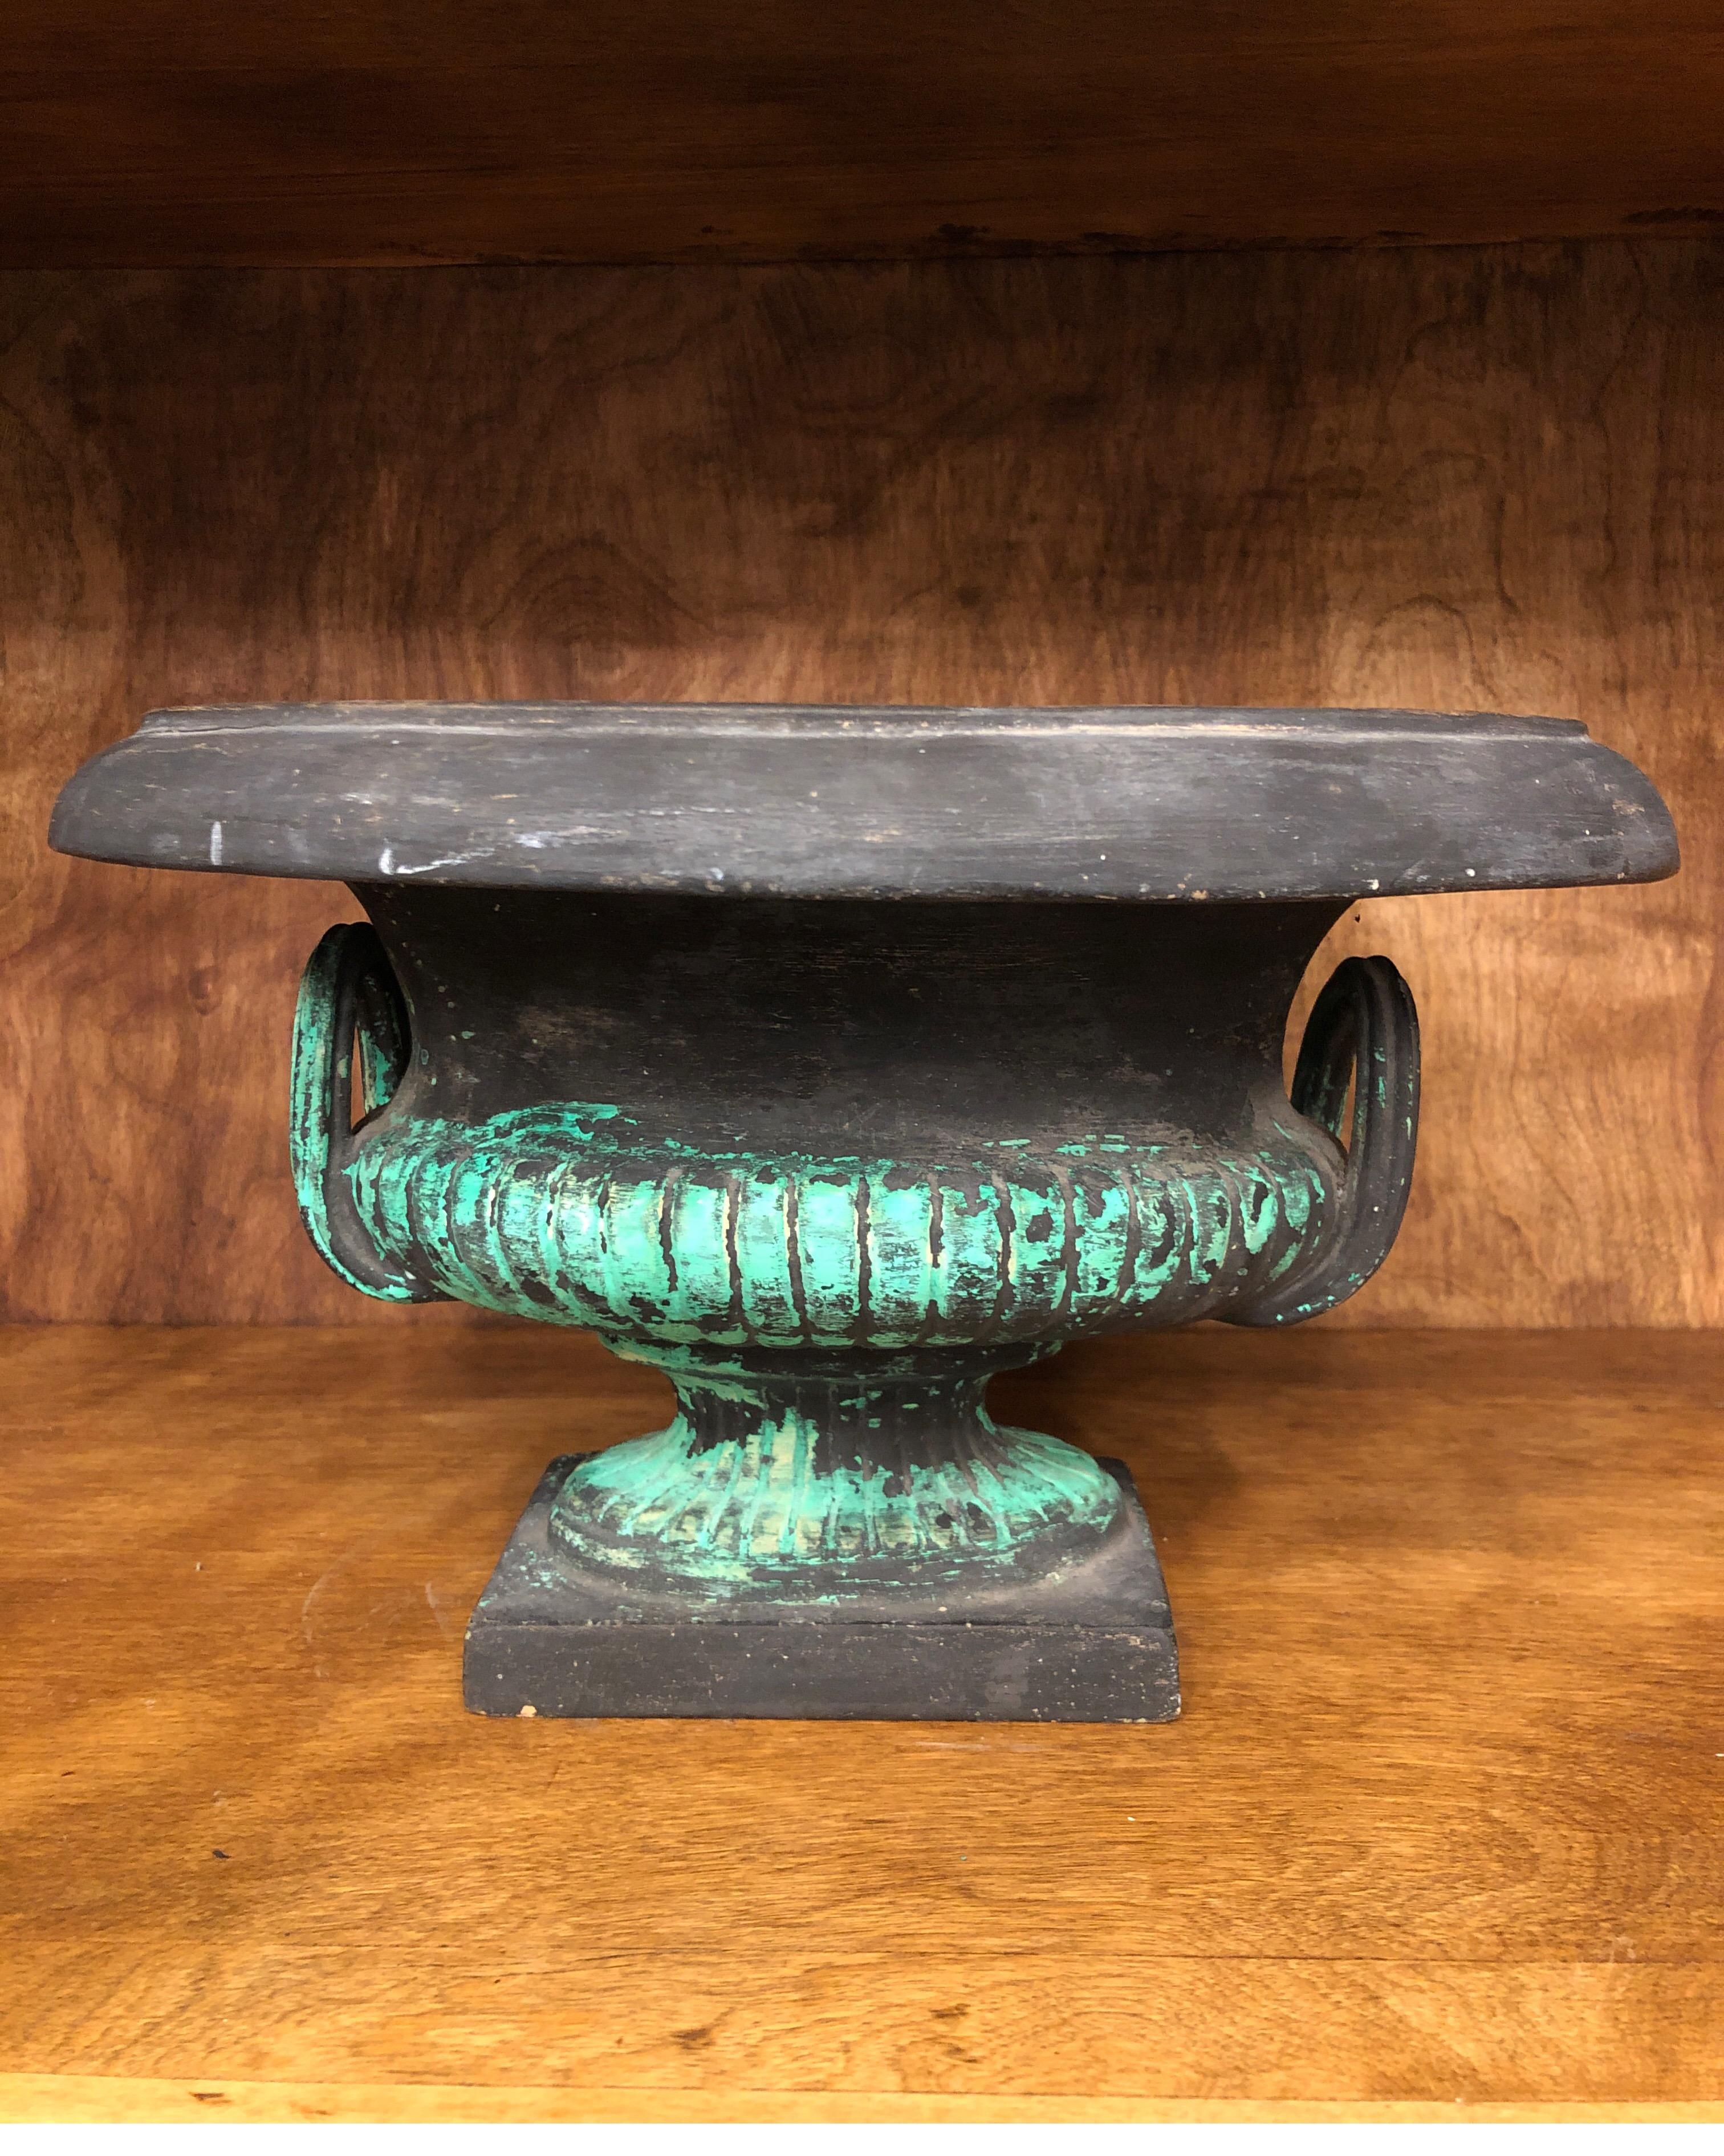 Black ceramic Art Nouveau style jardinière with green distressed finish.
Inside is flamed glaze and outside is natural finish.
Minor chipping/scuffs. (See pics).

Signed Italy.